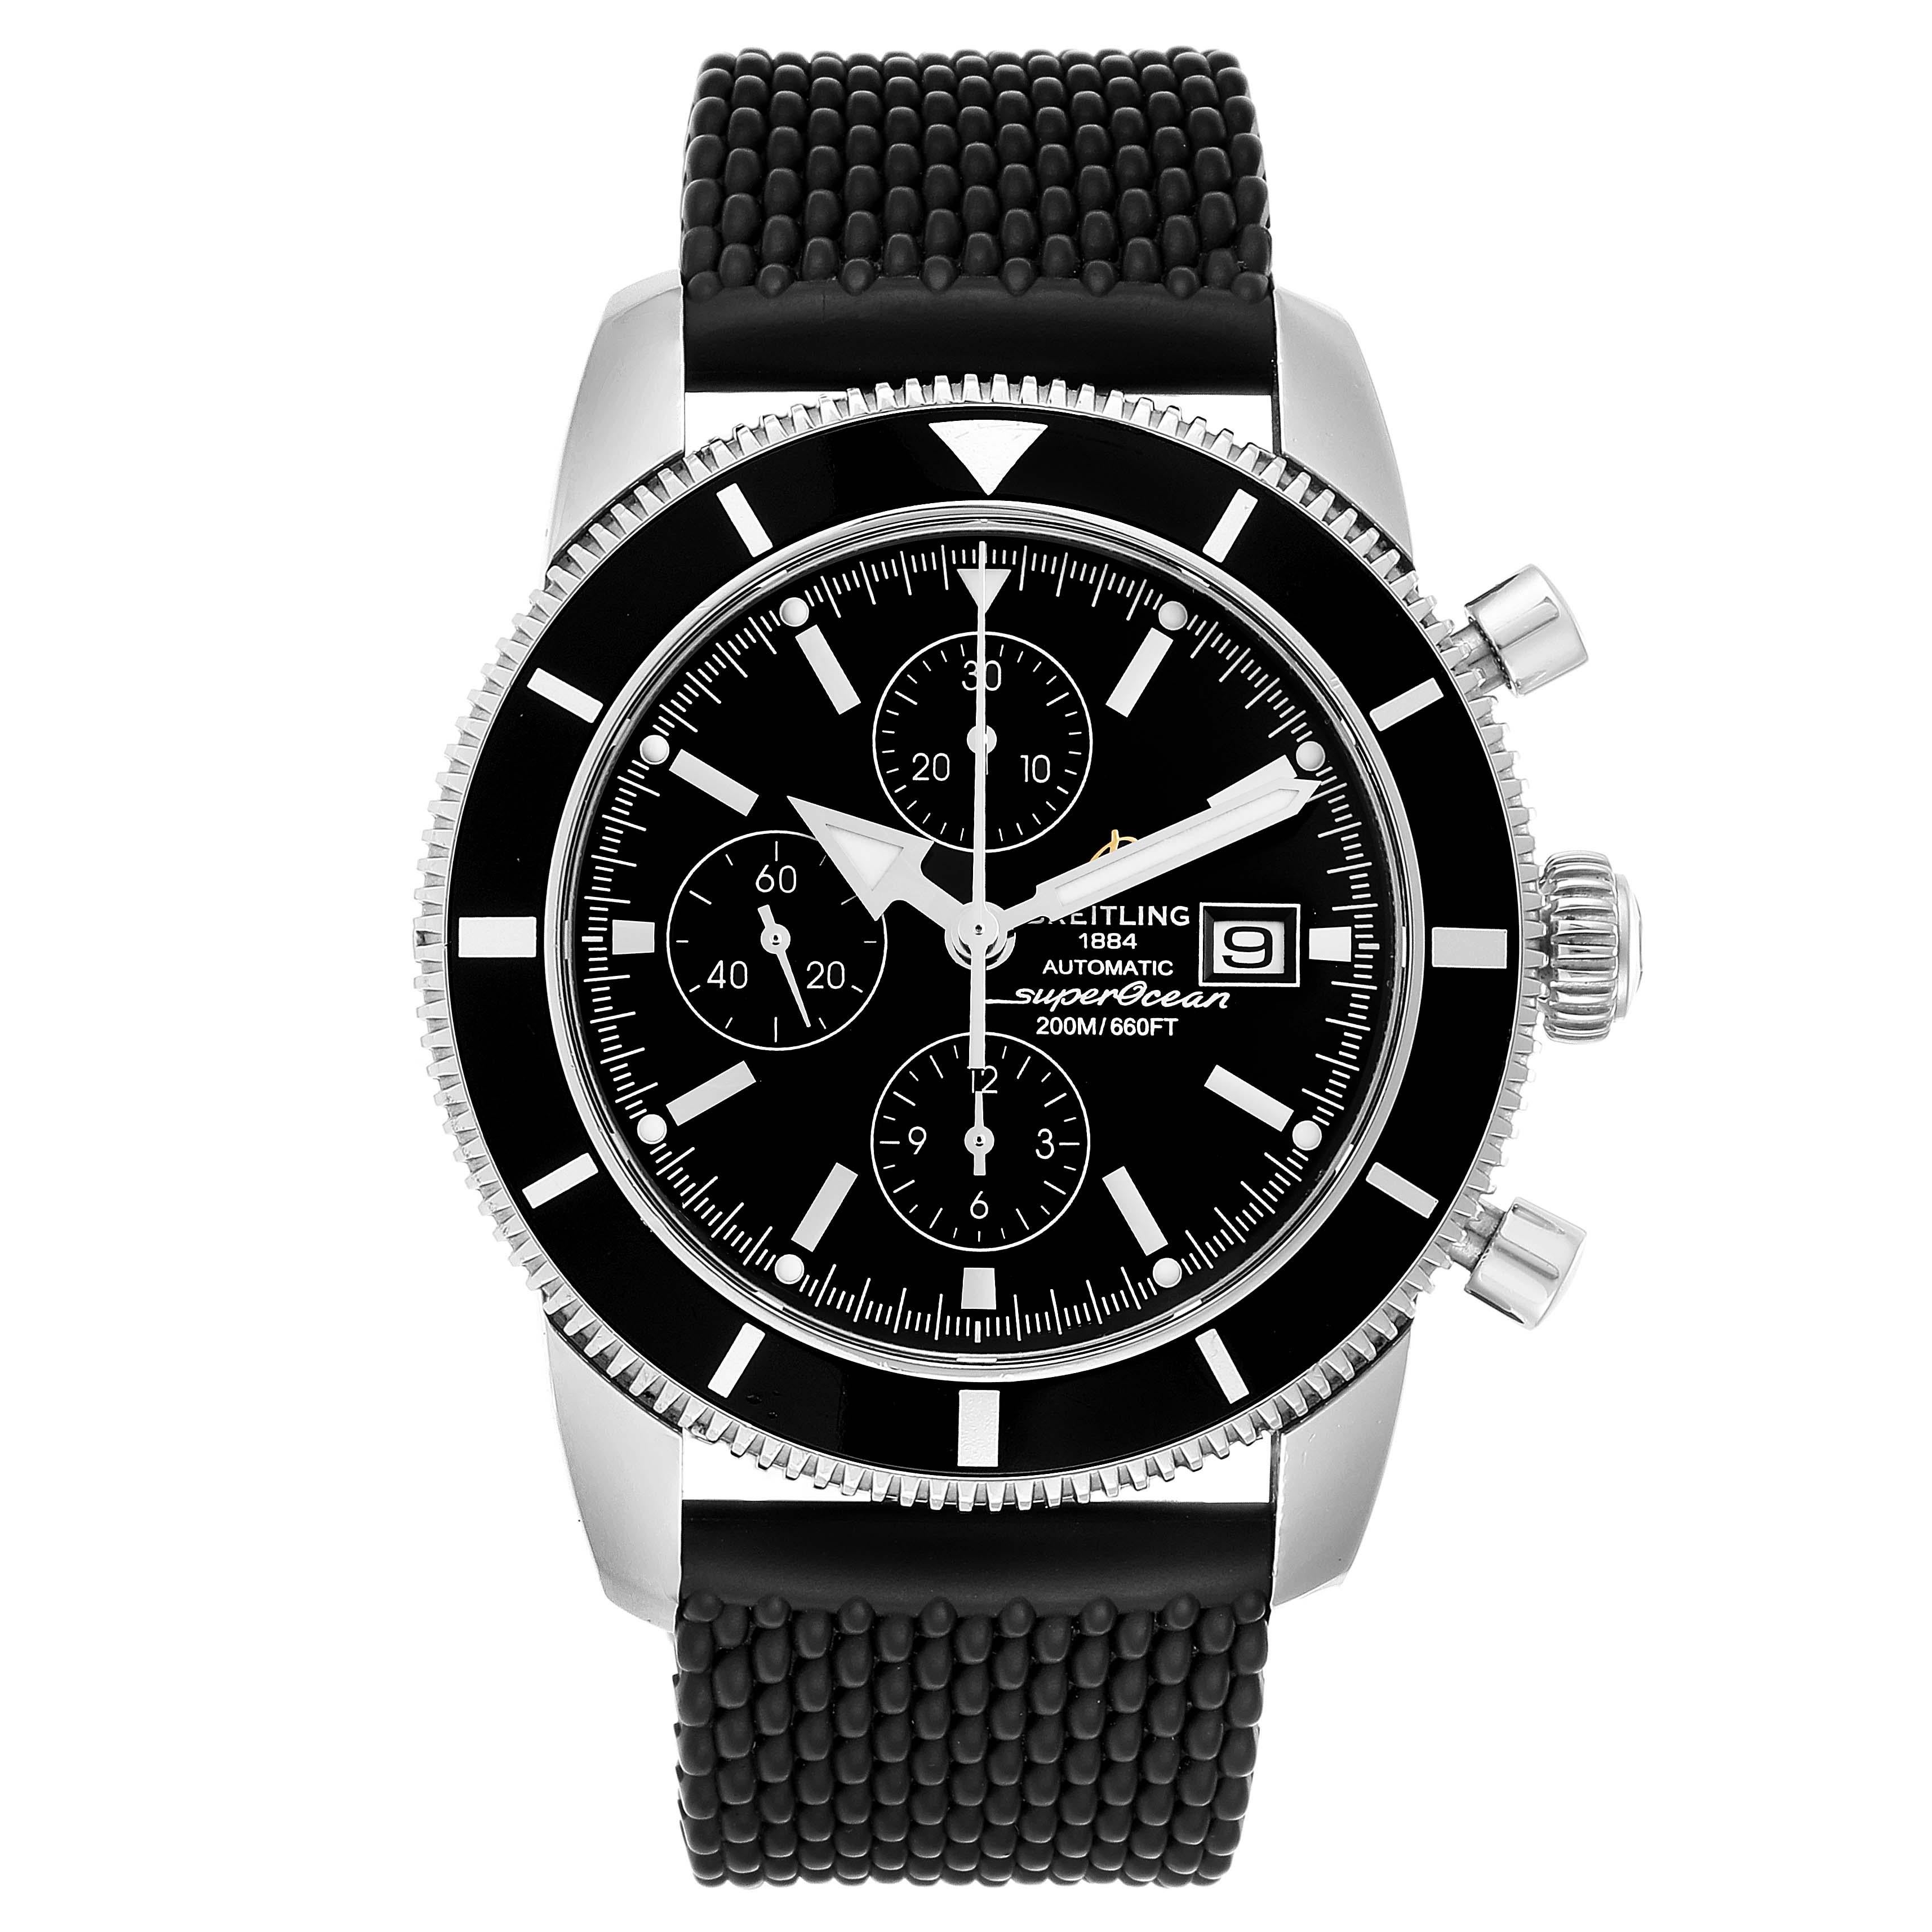 Breitling SuperOcean Heritage Chrono 46 Mens Watch A13320 Box Papers. Authomatic self-winding movement. Stainless steel case 46.0 mm in diameter. Stainless steel screwed-down crown. Lapidated lugs. Black unidirectional revolving bezel. Scratch